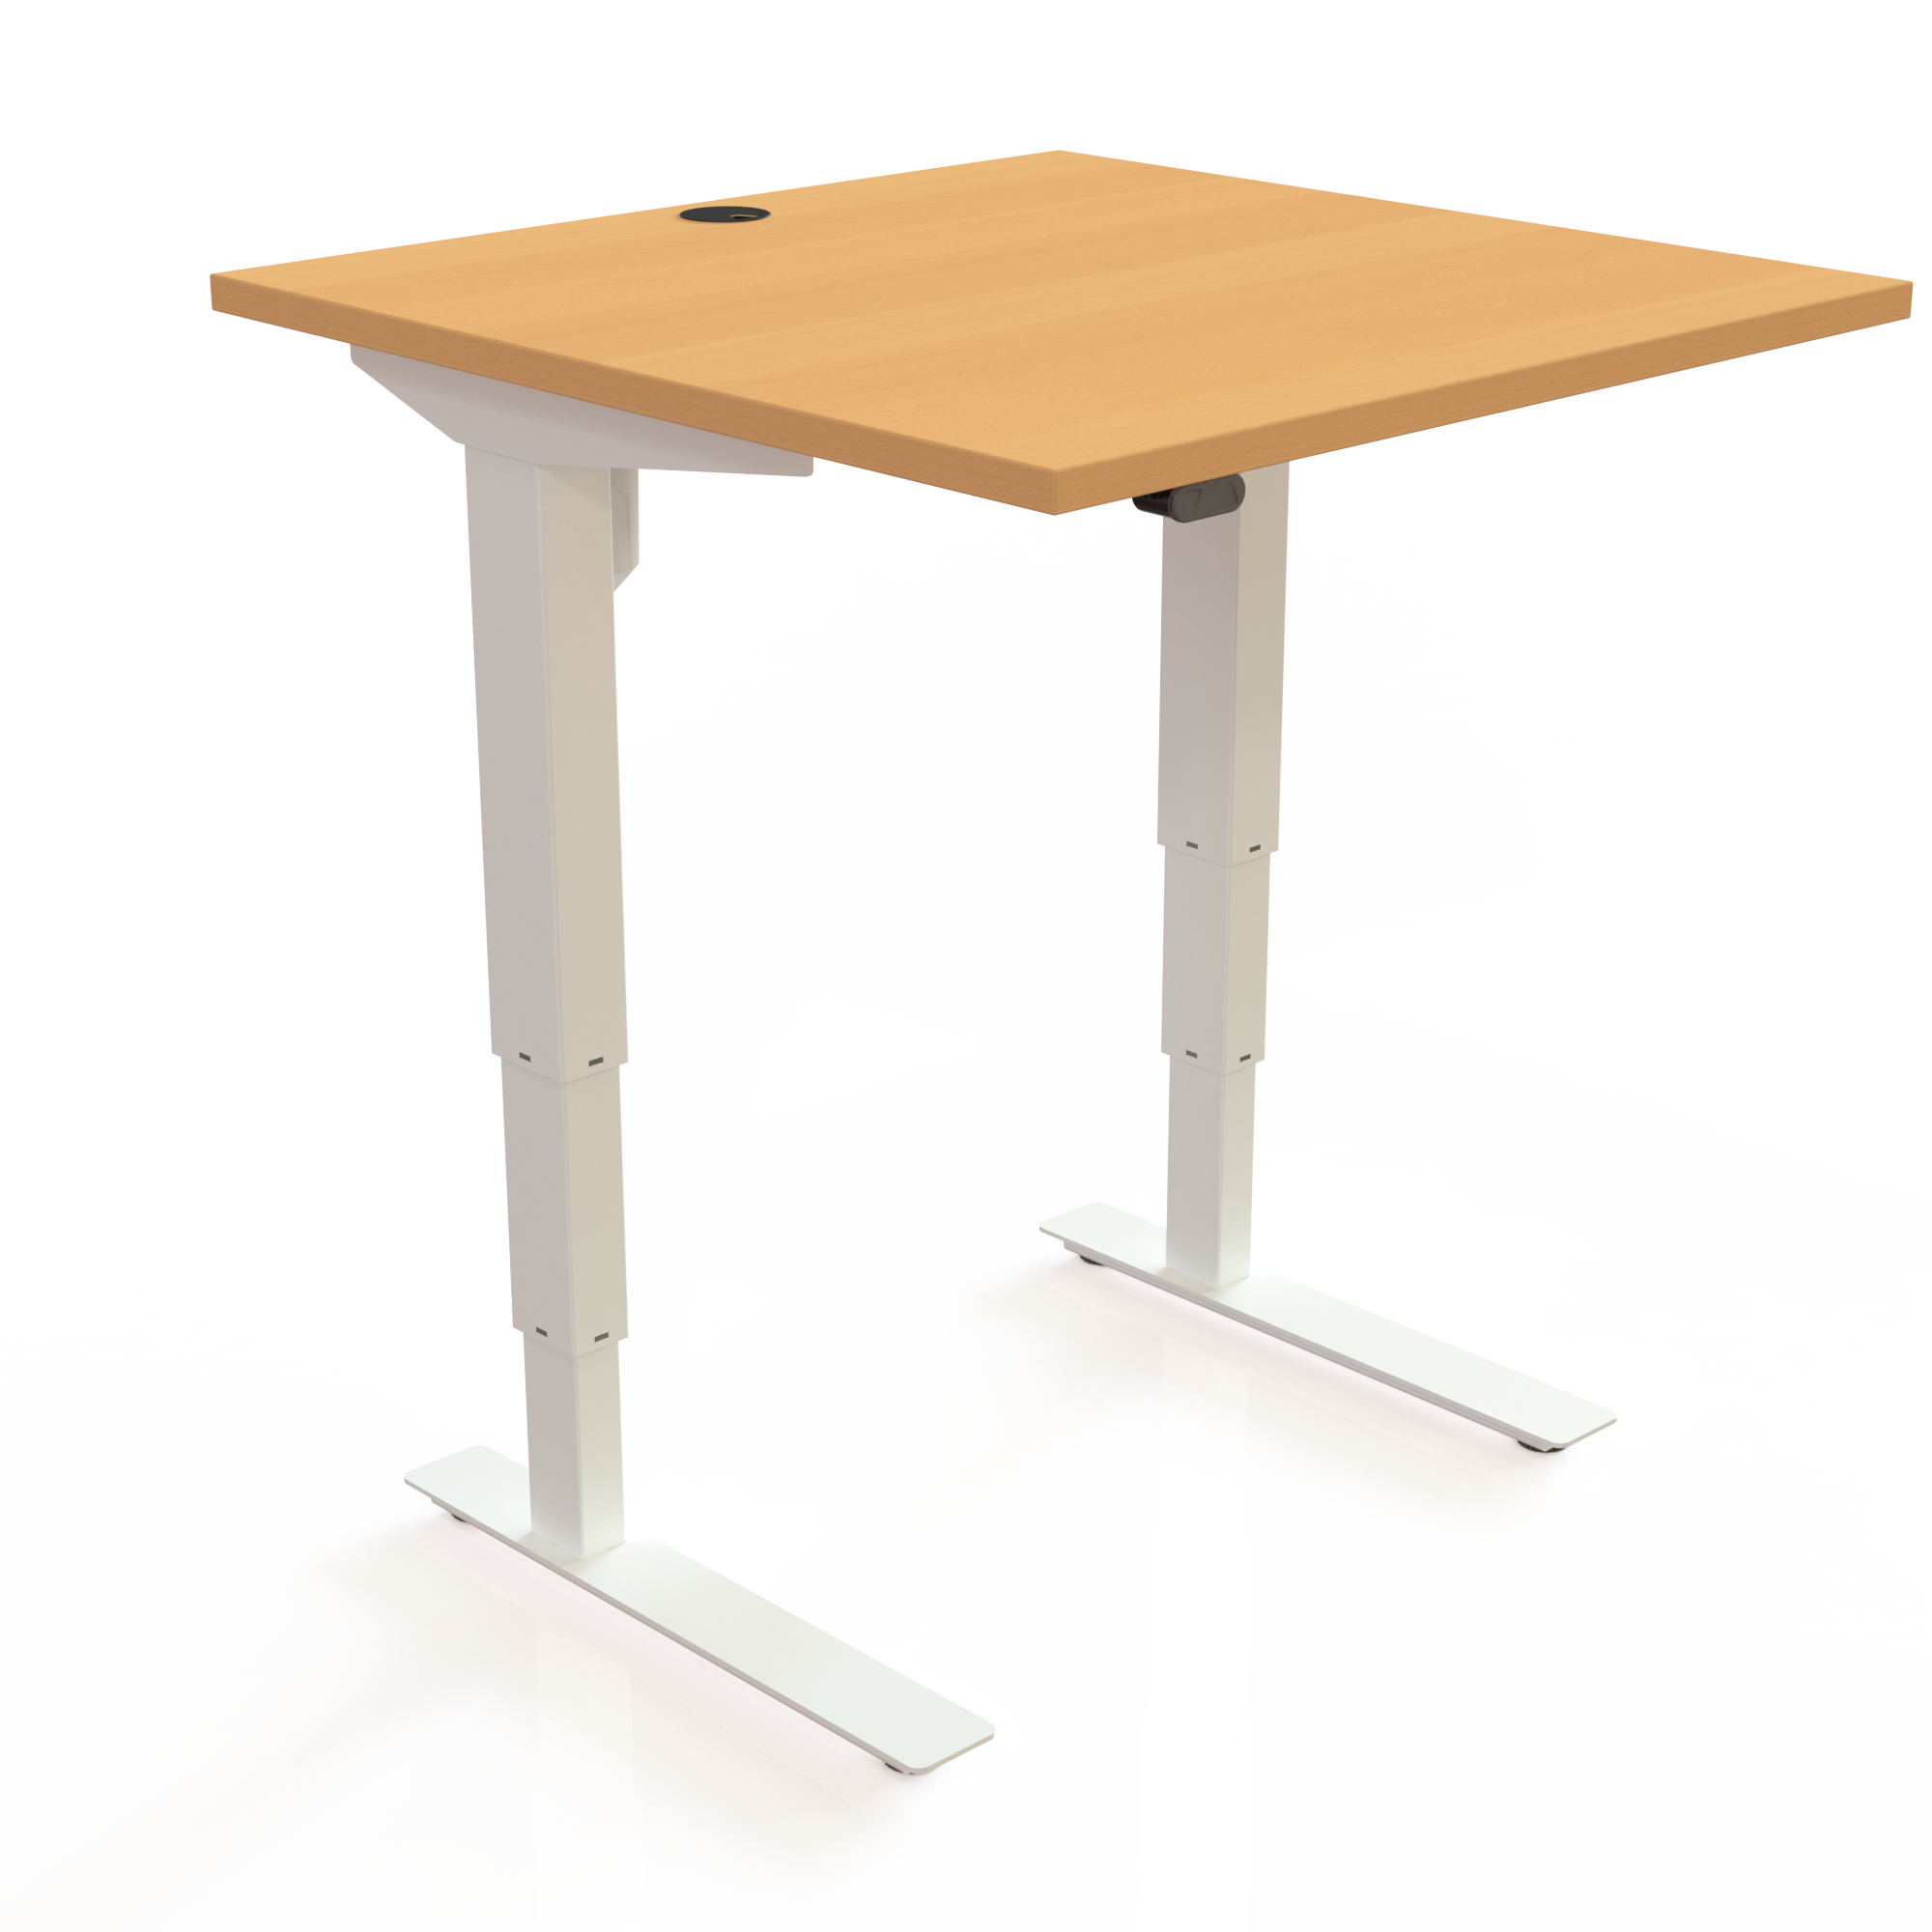 Electric Adjustable Desk | 80x80 cm | Beech with white frame